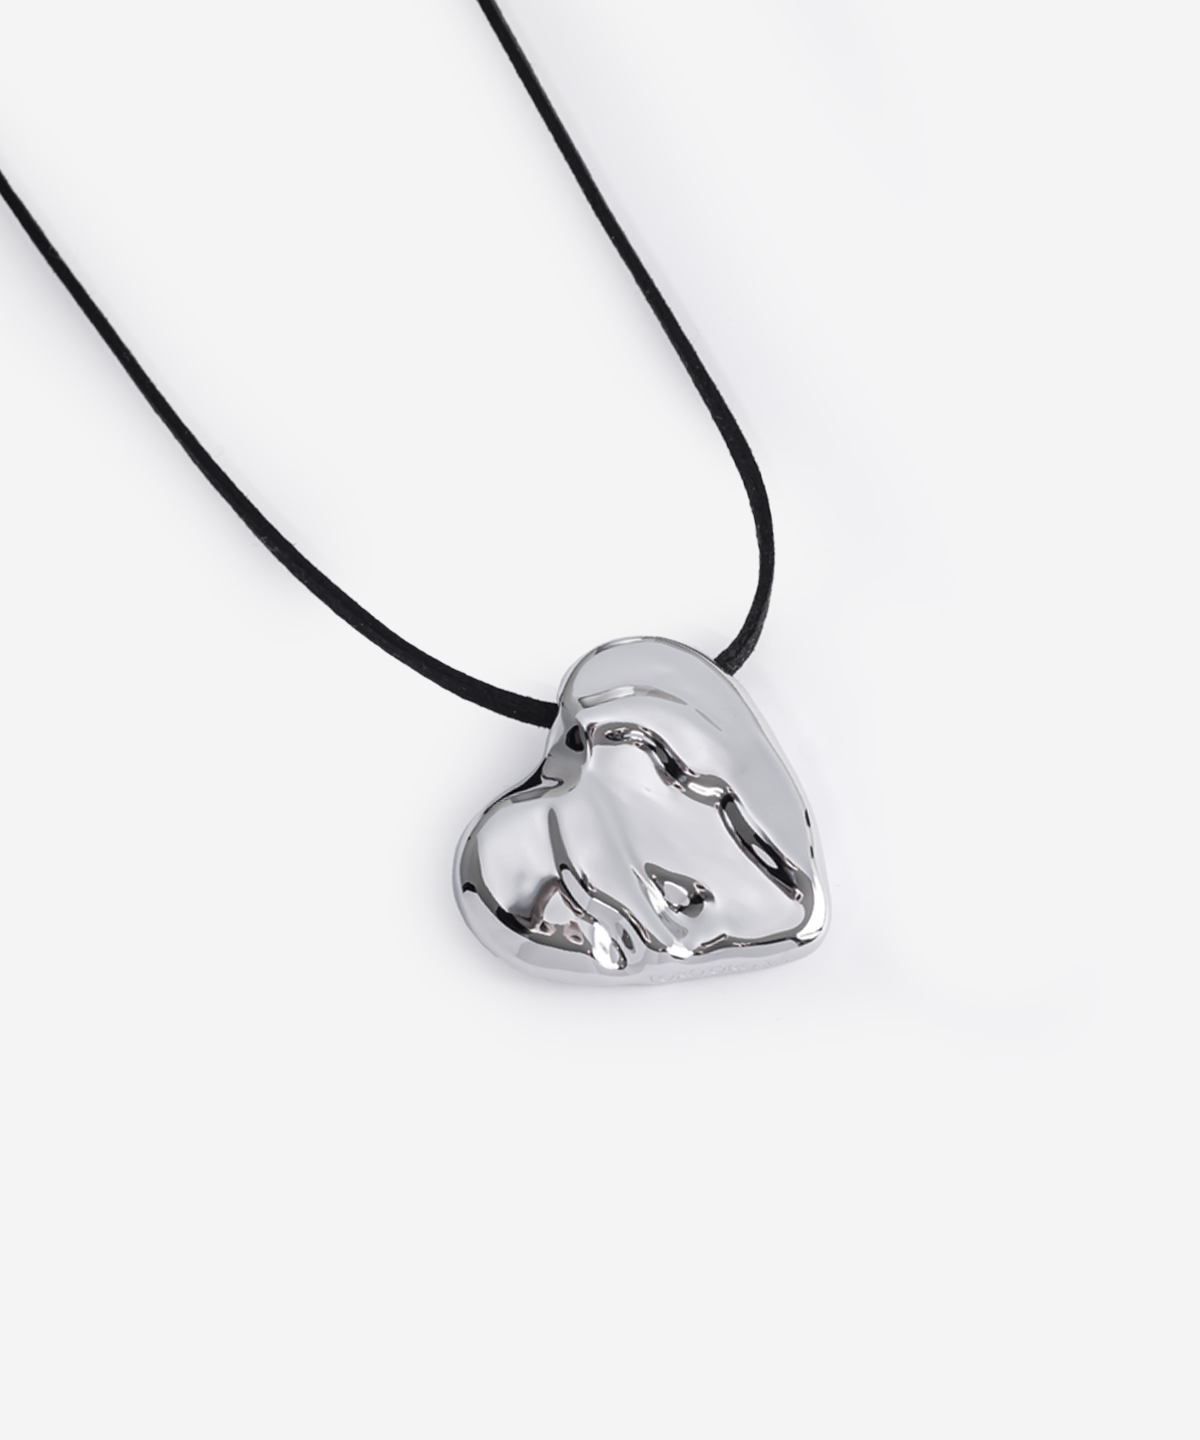 Kardia eremos silver-plated necklace